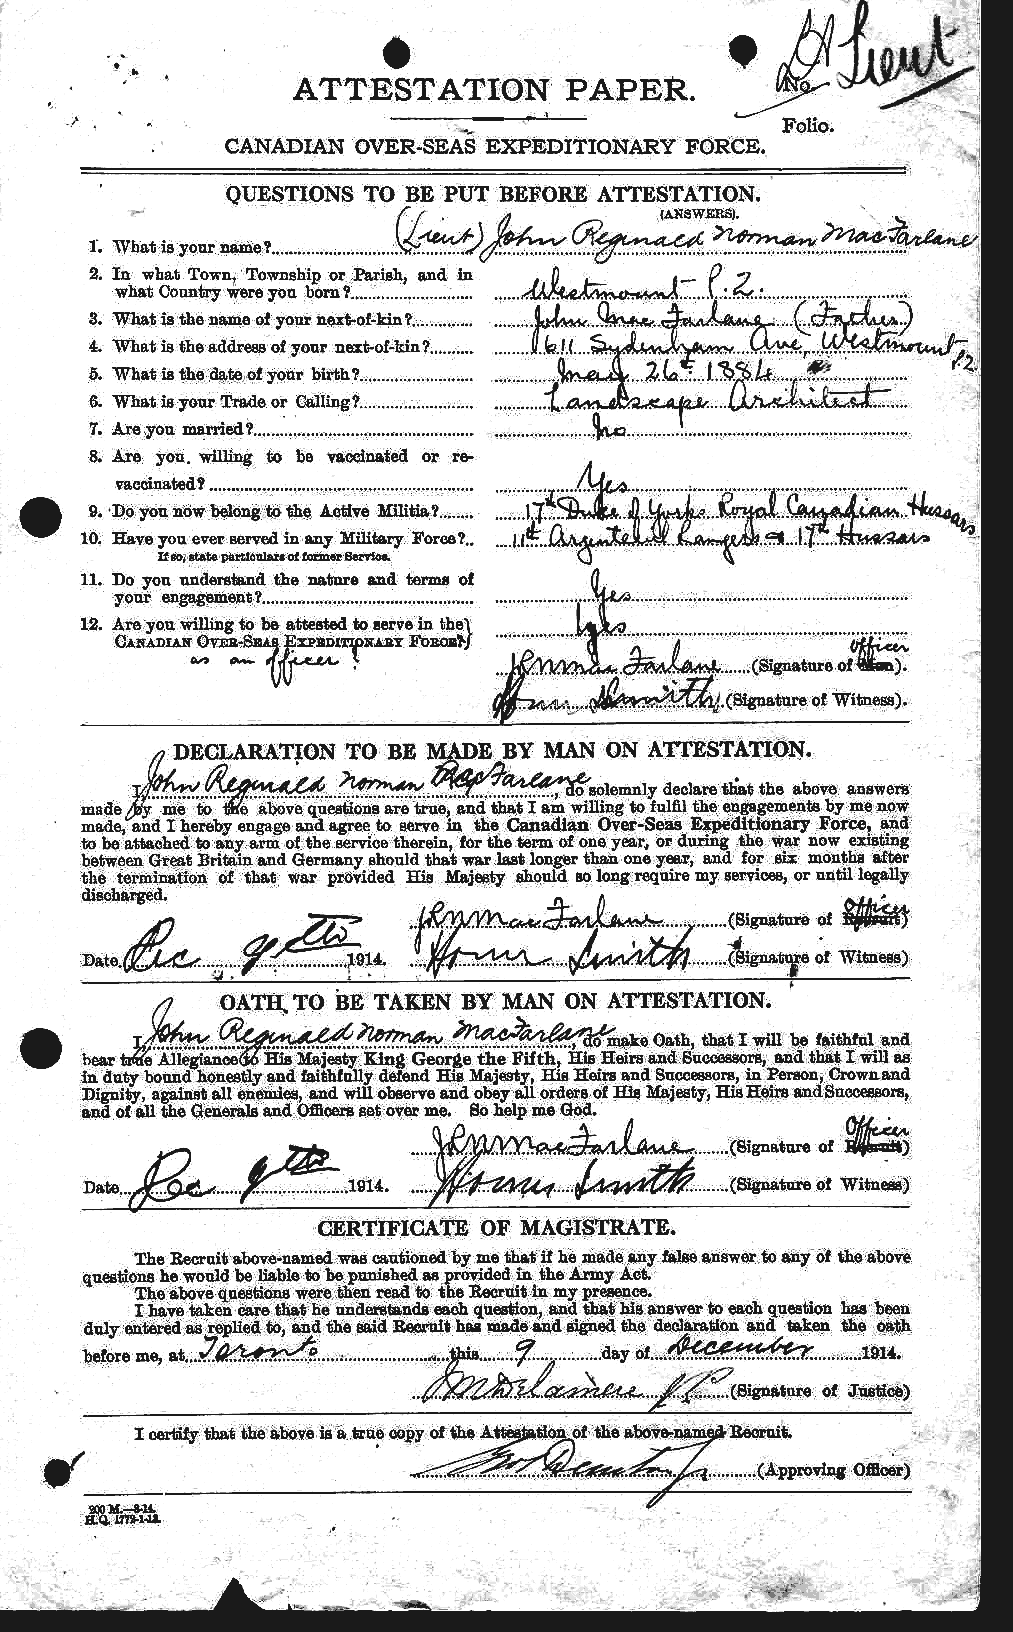 Personnel Records of the First World War - CEF 522701a